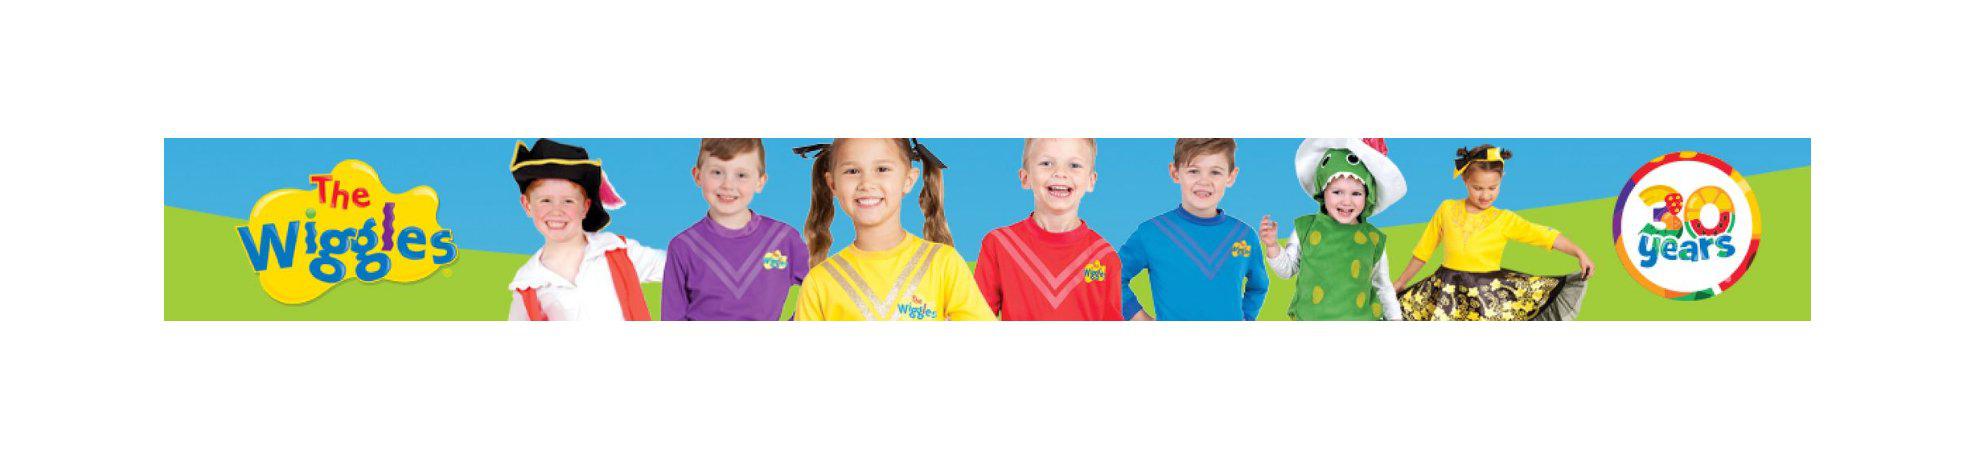 The Wiggles Costumes and Accessories - Kids Mega Mart